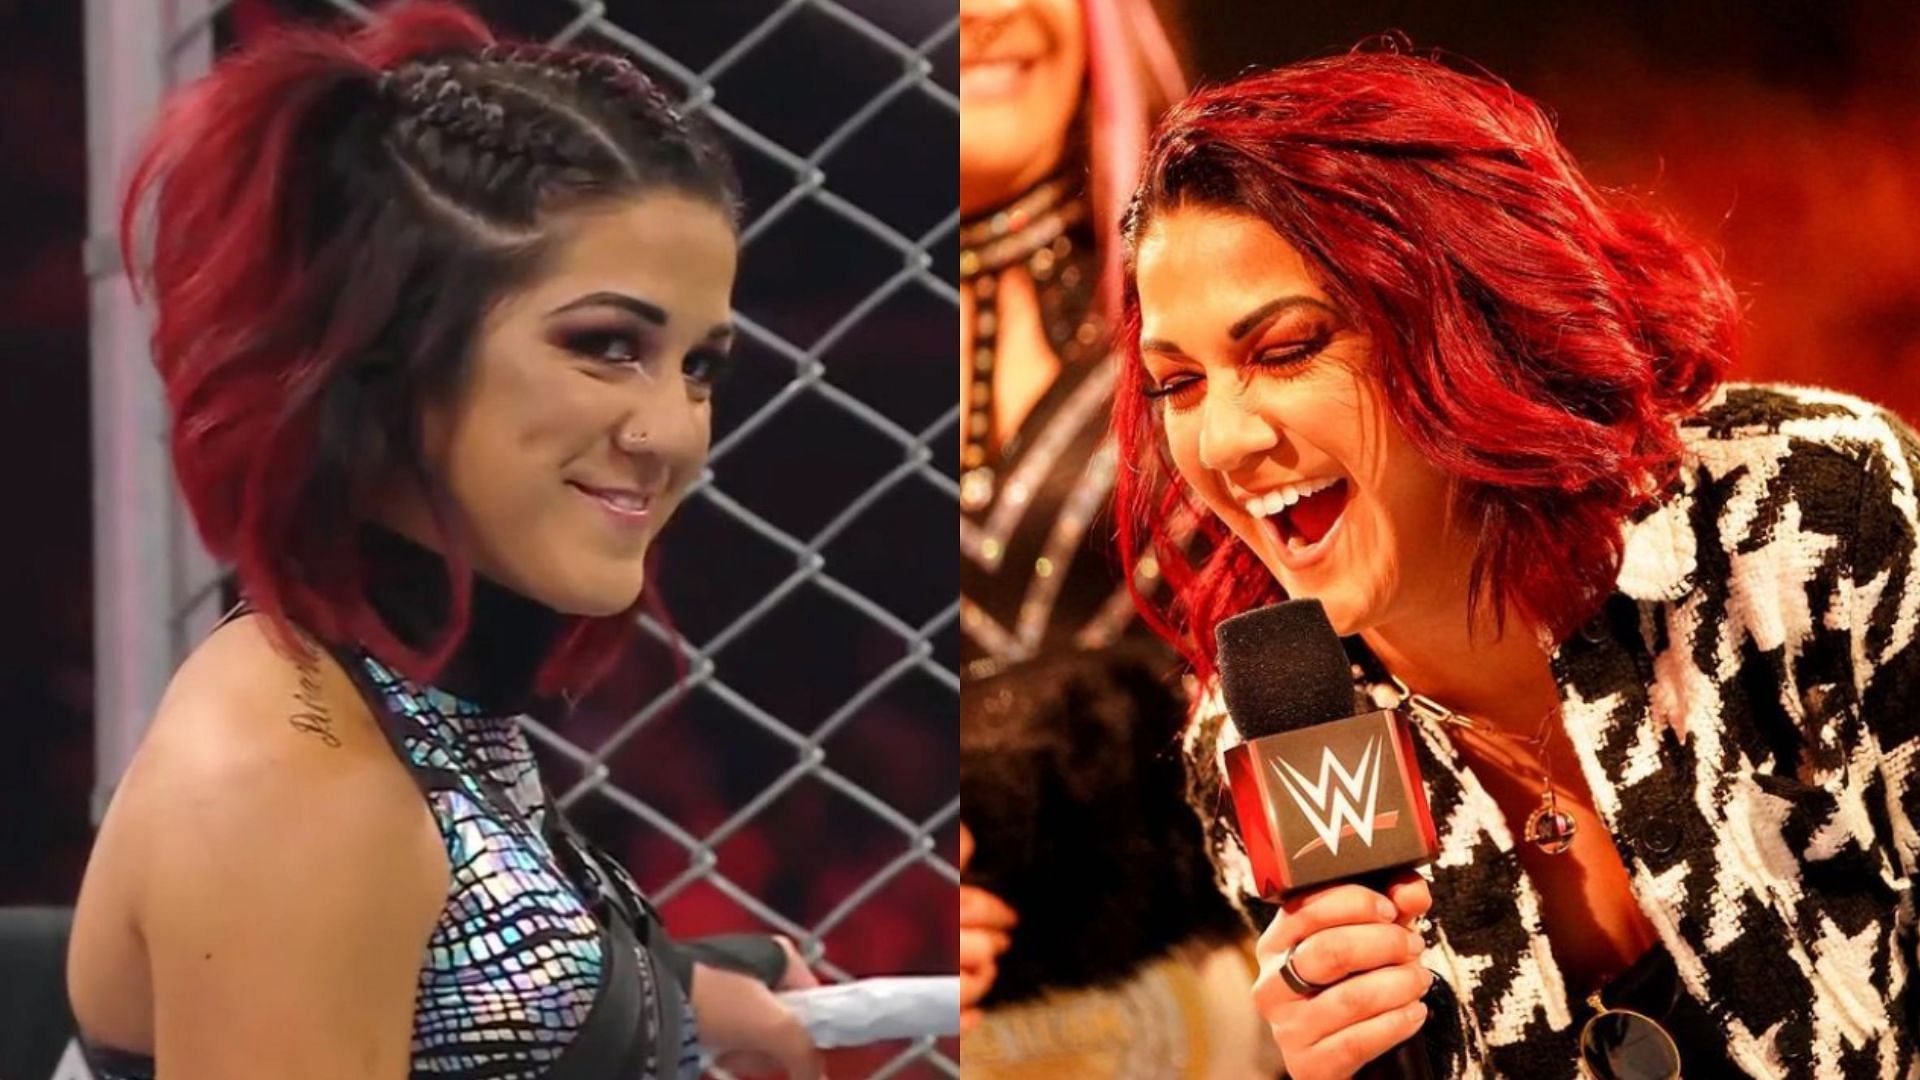 Bayley has responded to a WWE Hall of Famer.